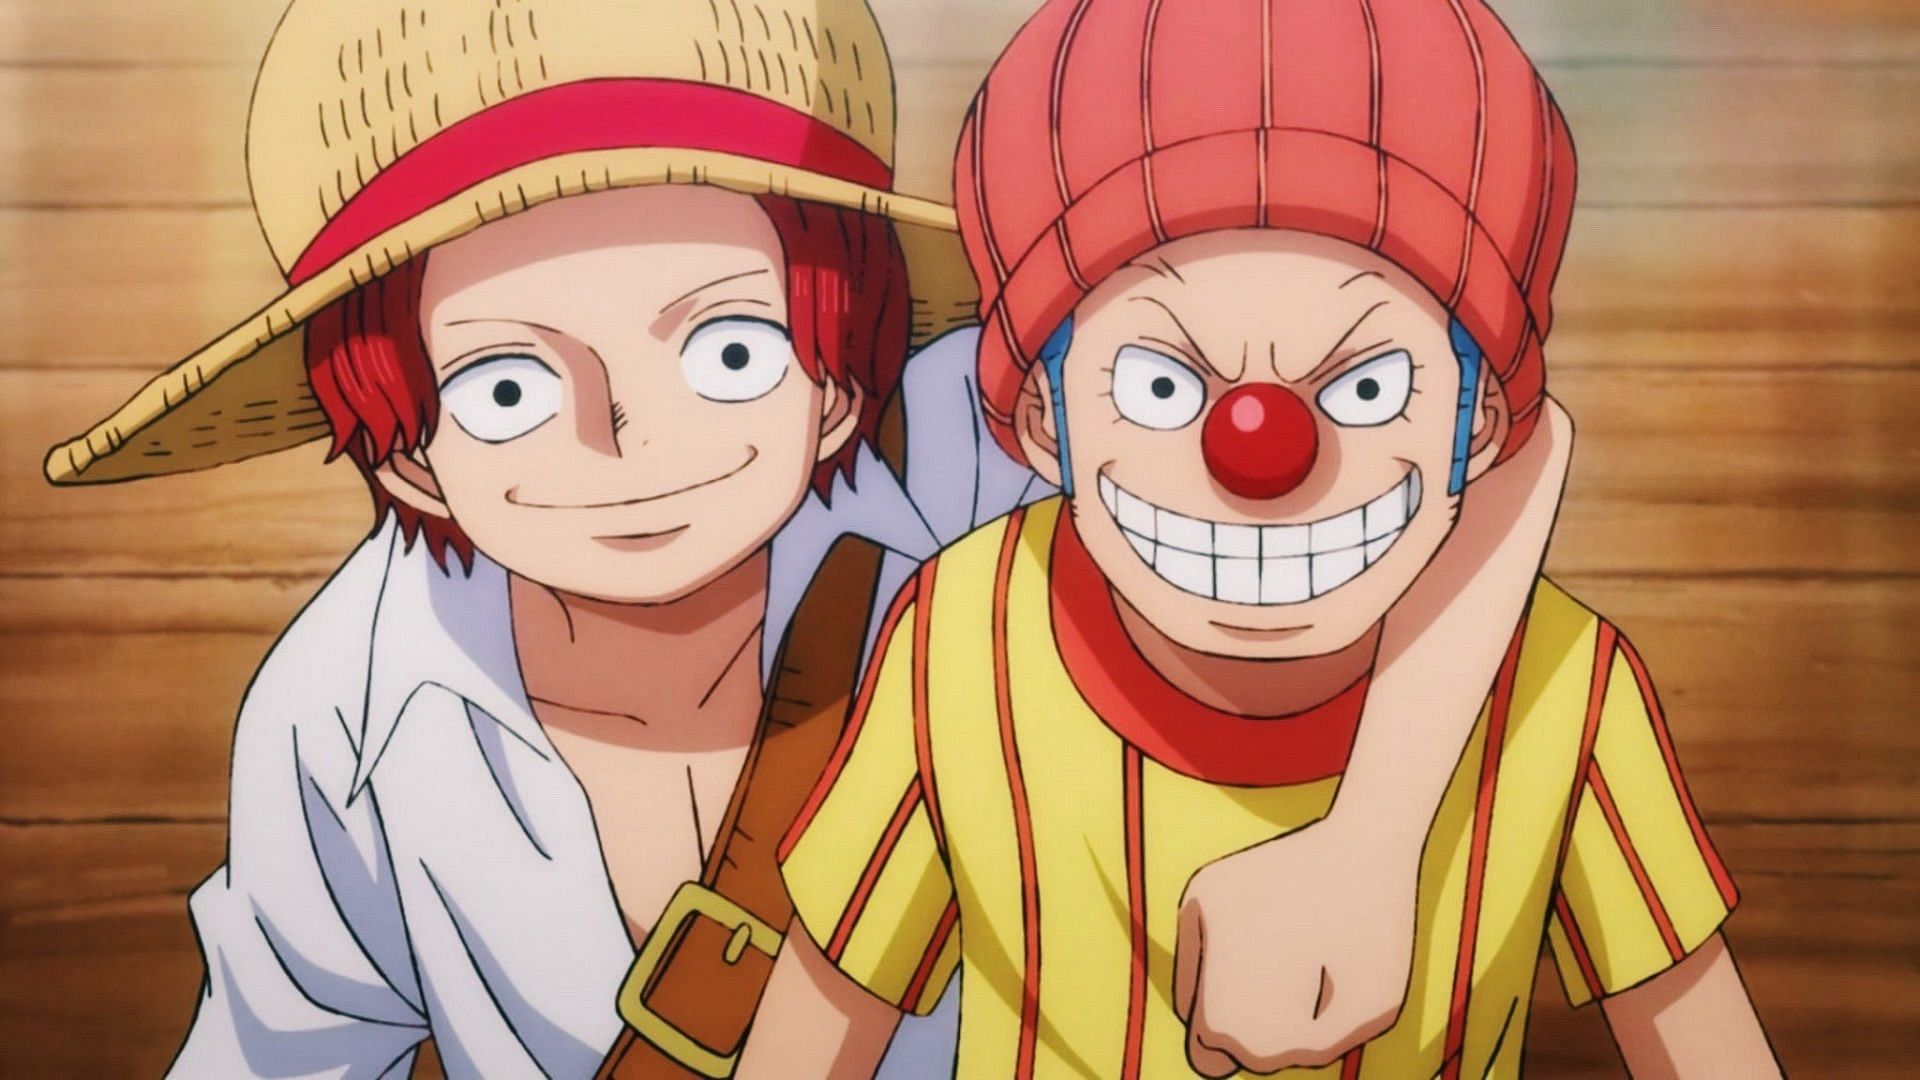 Shanks (left) and Buggy (right) as seen in the One Piece anime as children (Image via Toei Animation)